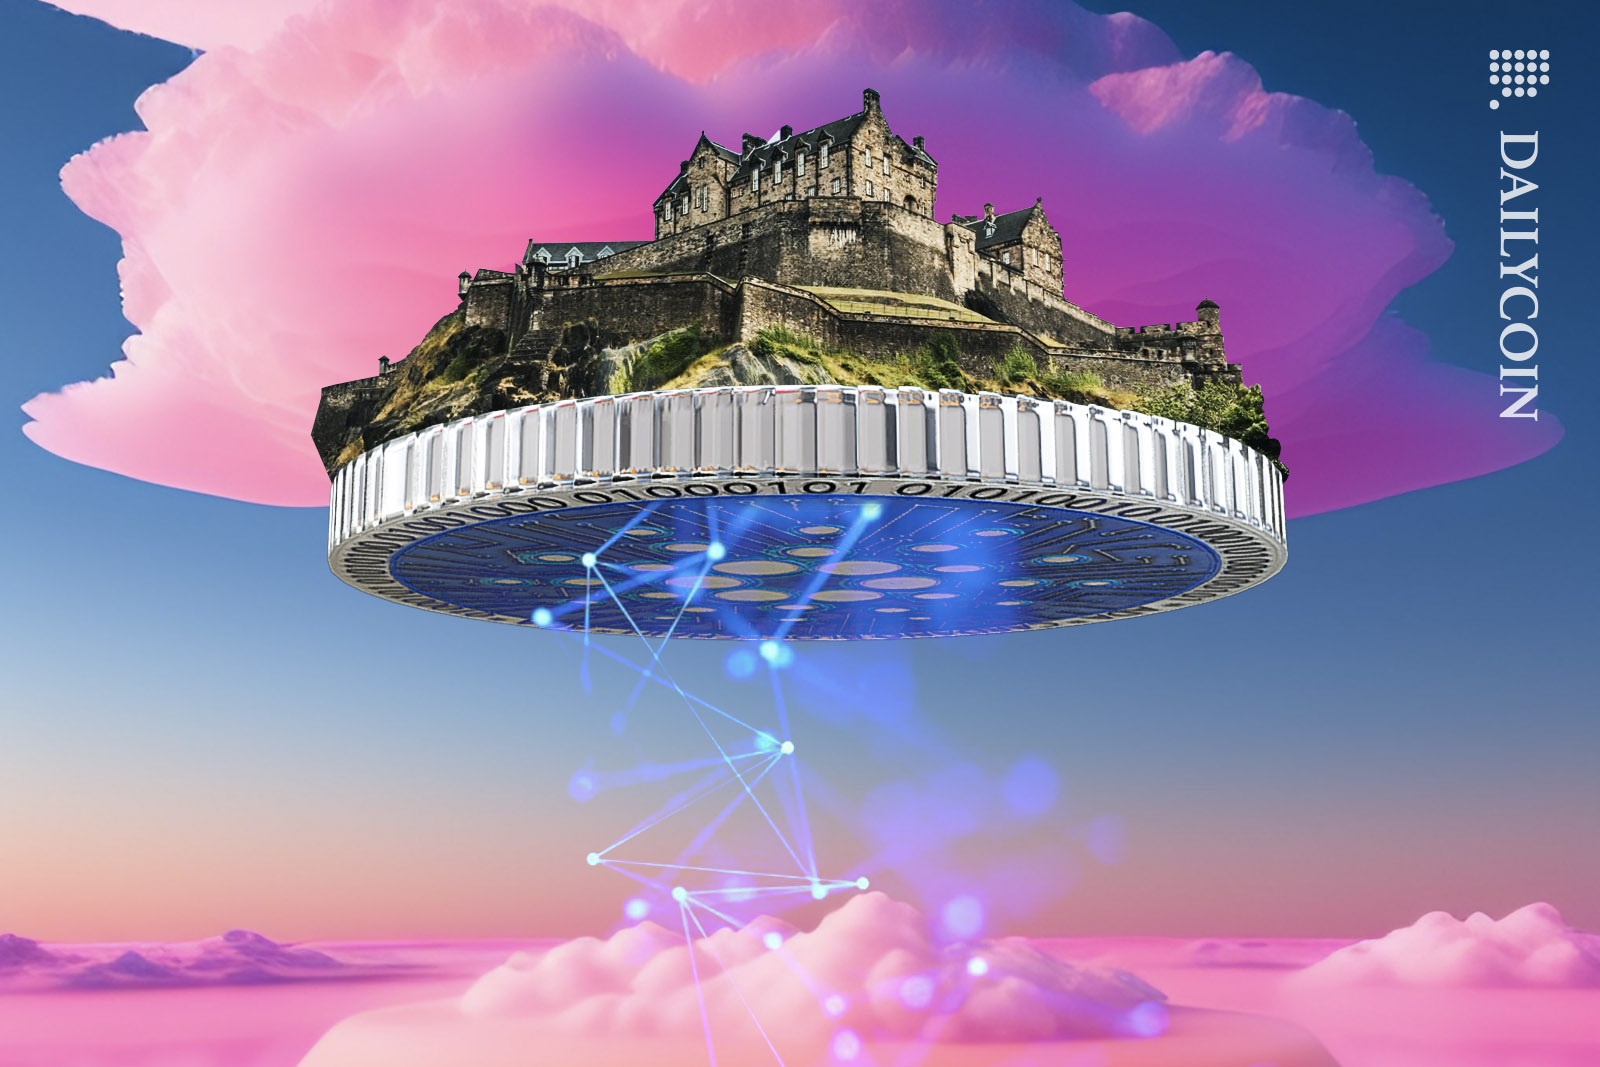 The Edinburgh castle floating on a Cardano coin in between pink clouds.